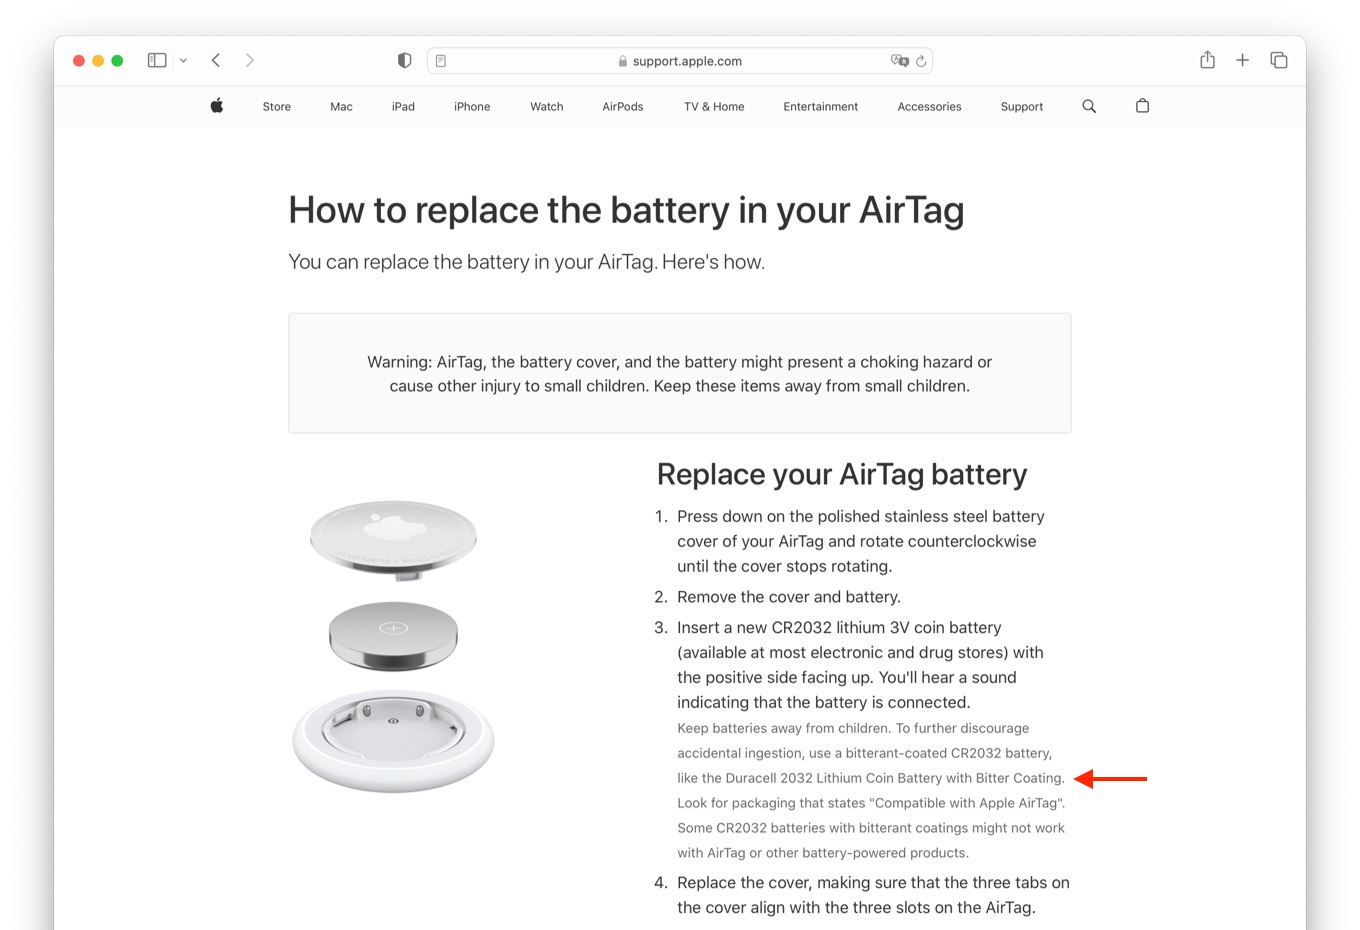 How to replace the battery in your AirTag